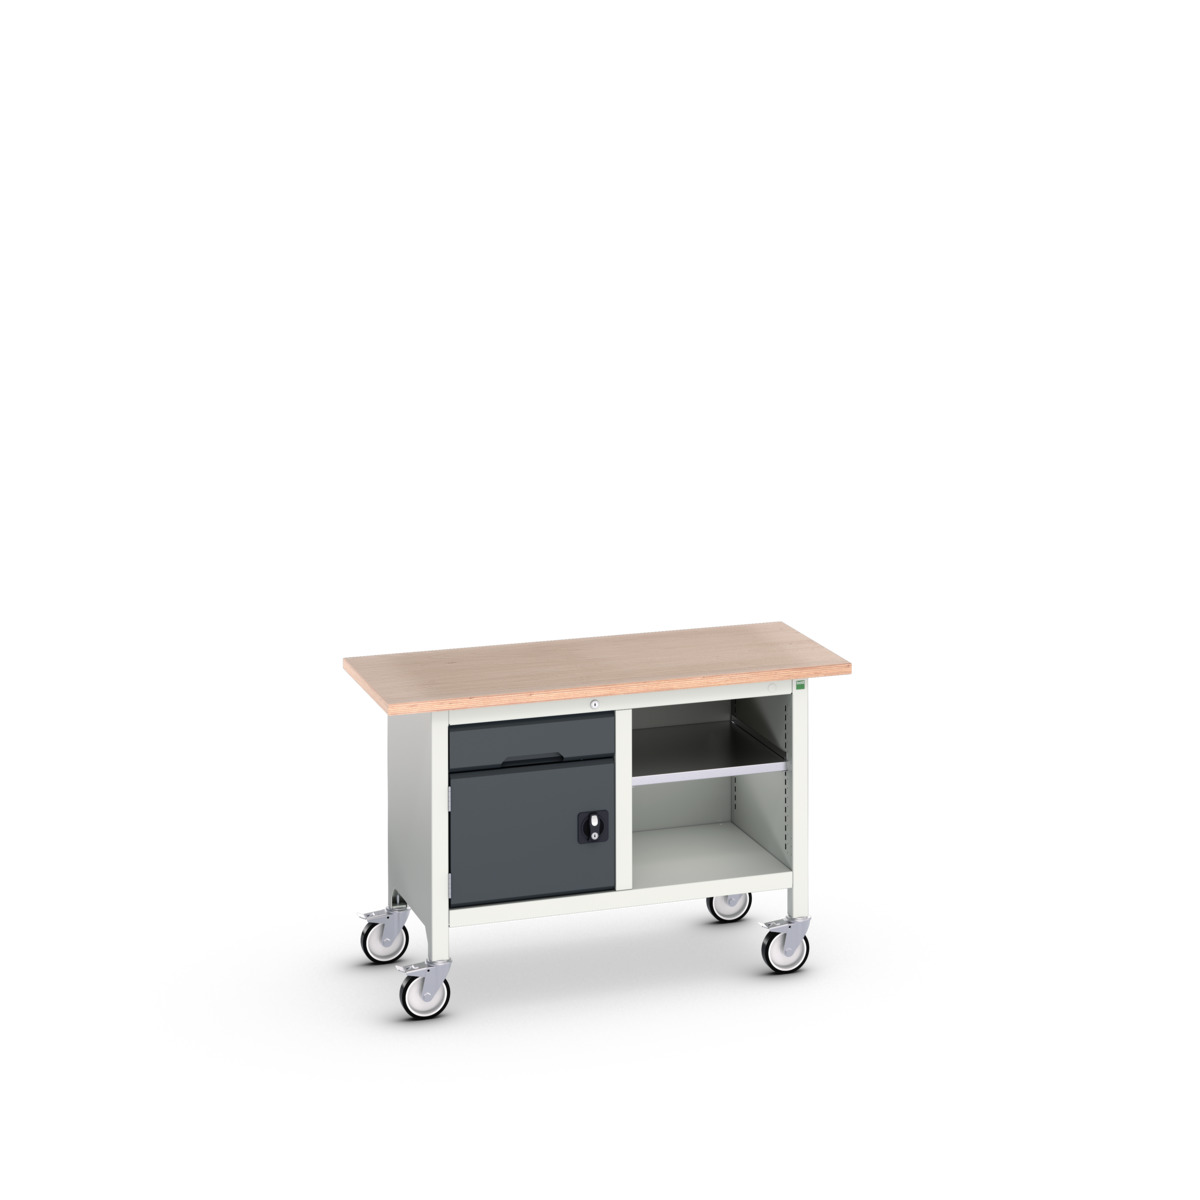 16923200.19 - verso mobile storage bench (mpx)